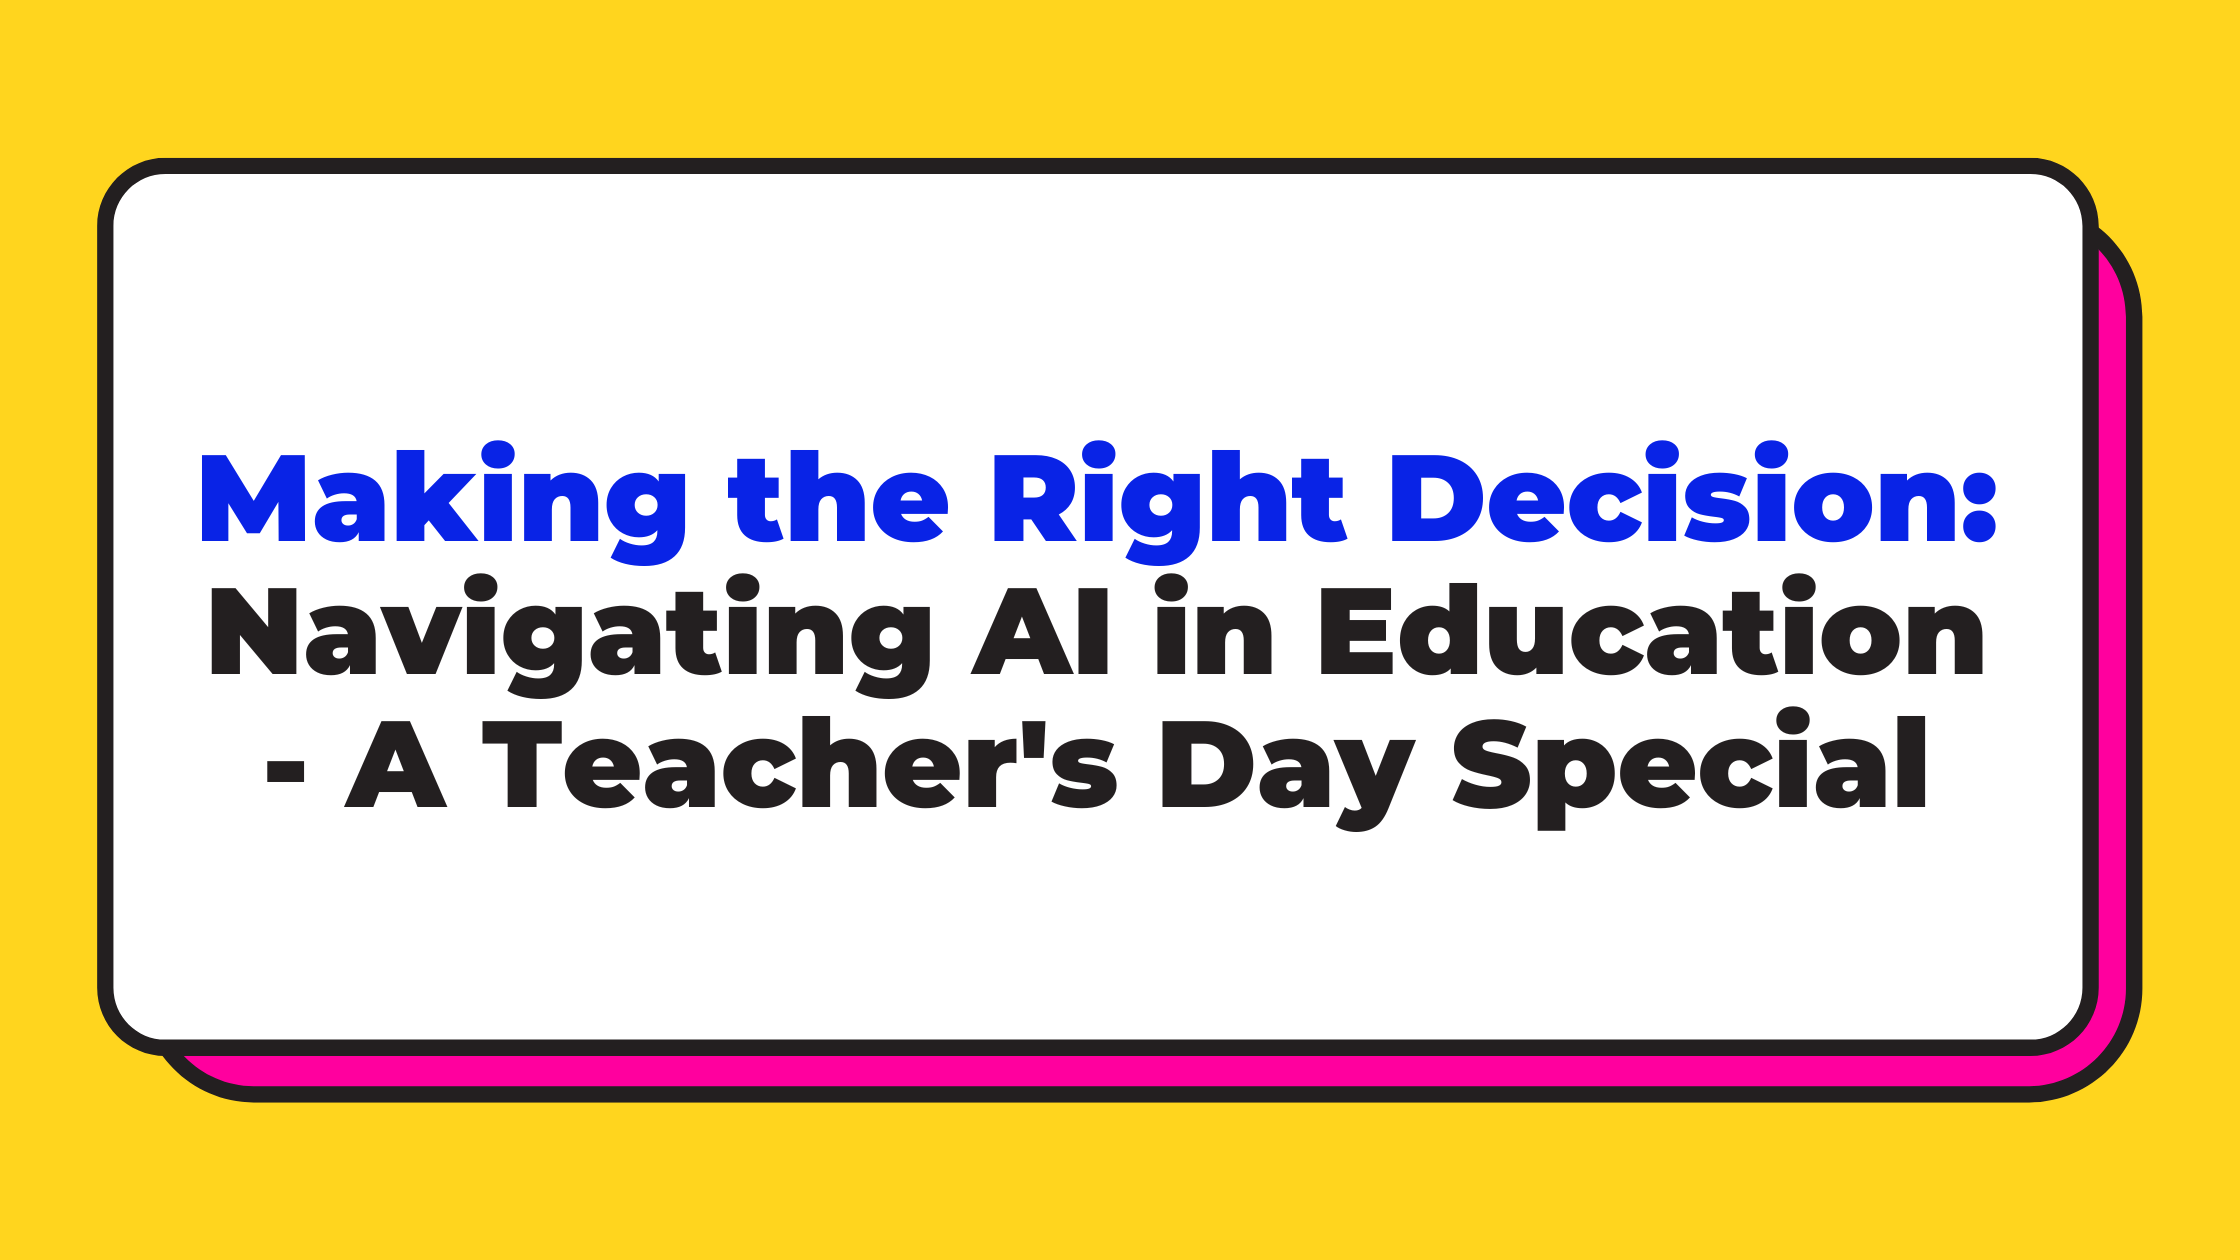 Making the Right Decision: Navigating AI in Education - A Teacher's Day Special